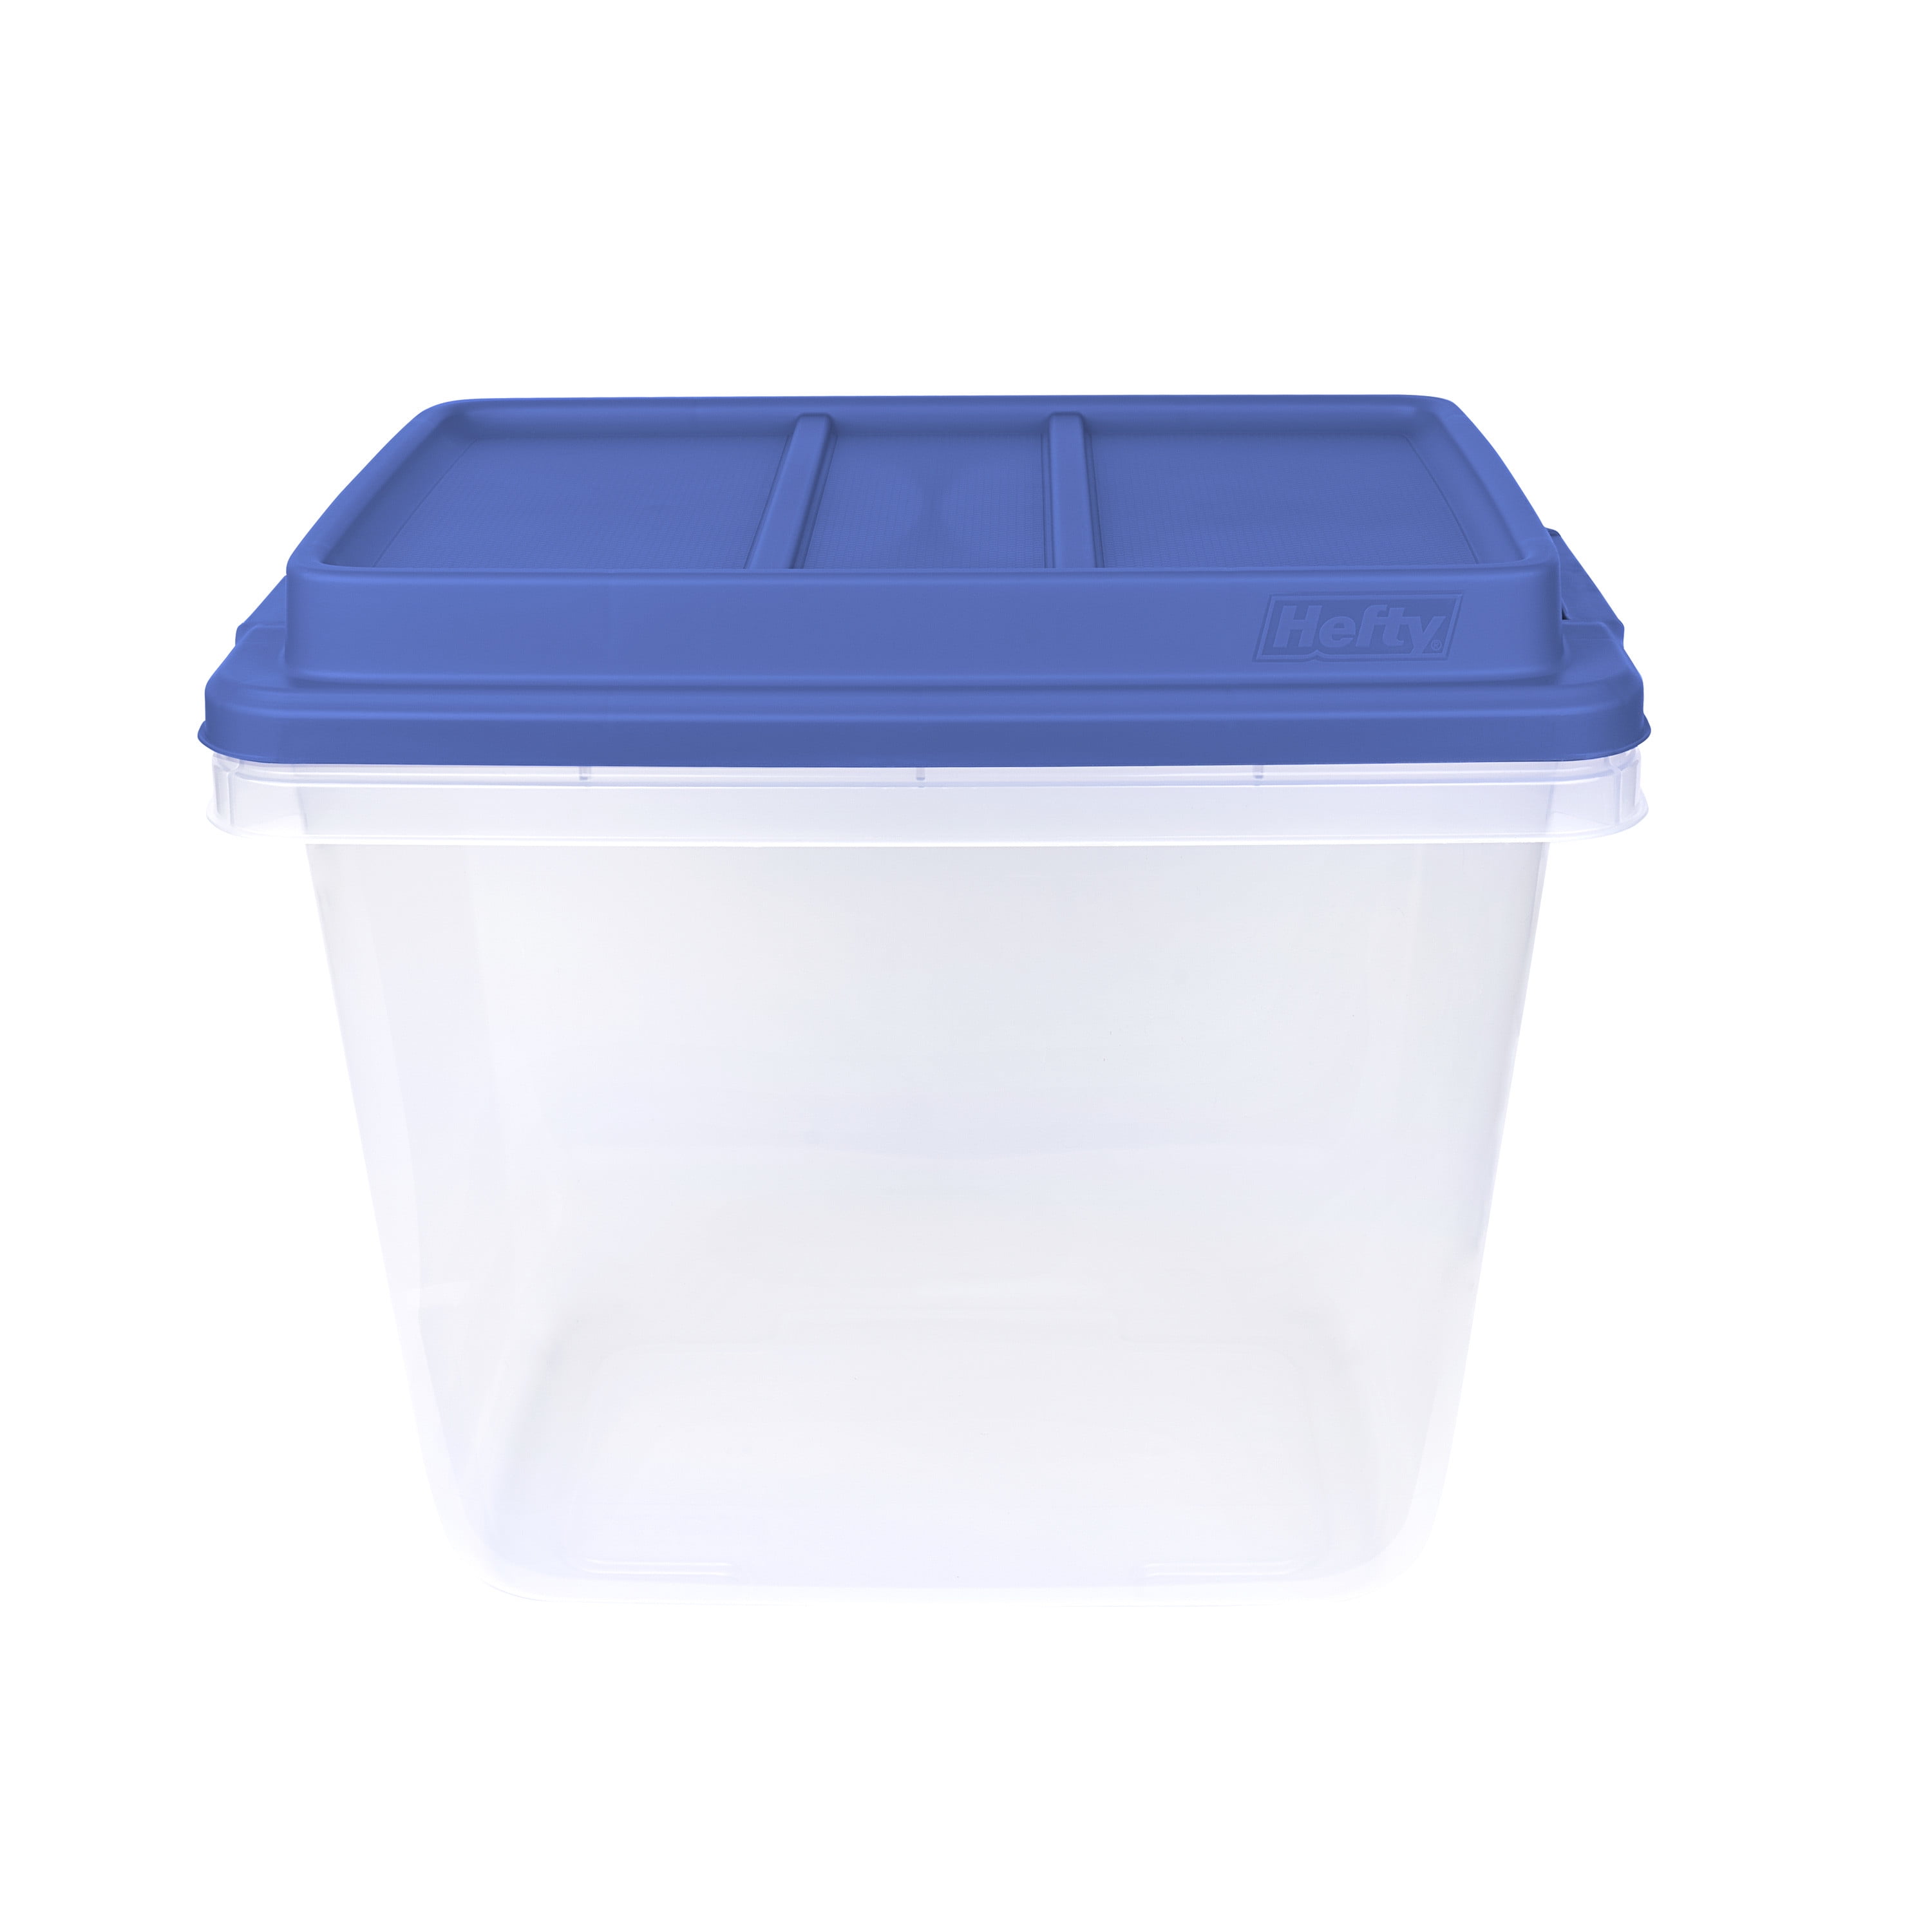  Hefty HI-RISE Clear Plastic Bin with Smoke Blue Lid (6 Pack) -  32 qt Storage Container with Lid, Ideal Space Saver for Closet Shoe Storage  Bins and Under Shelf Storage 